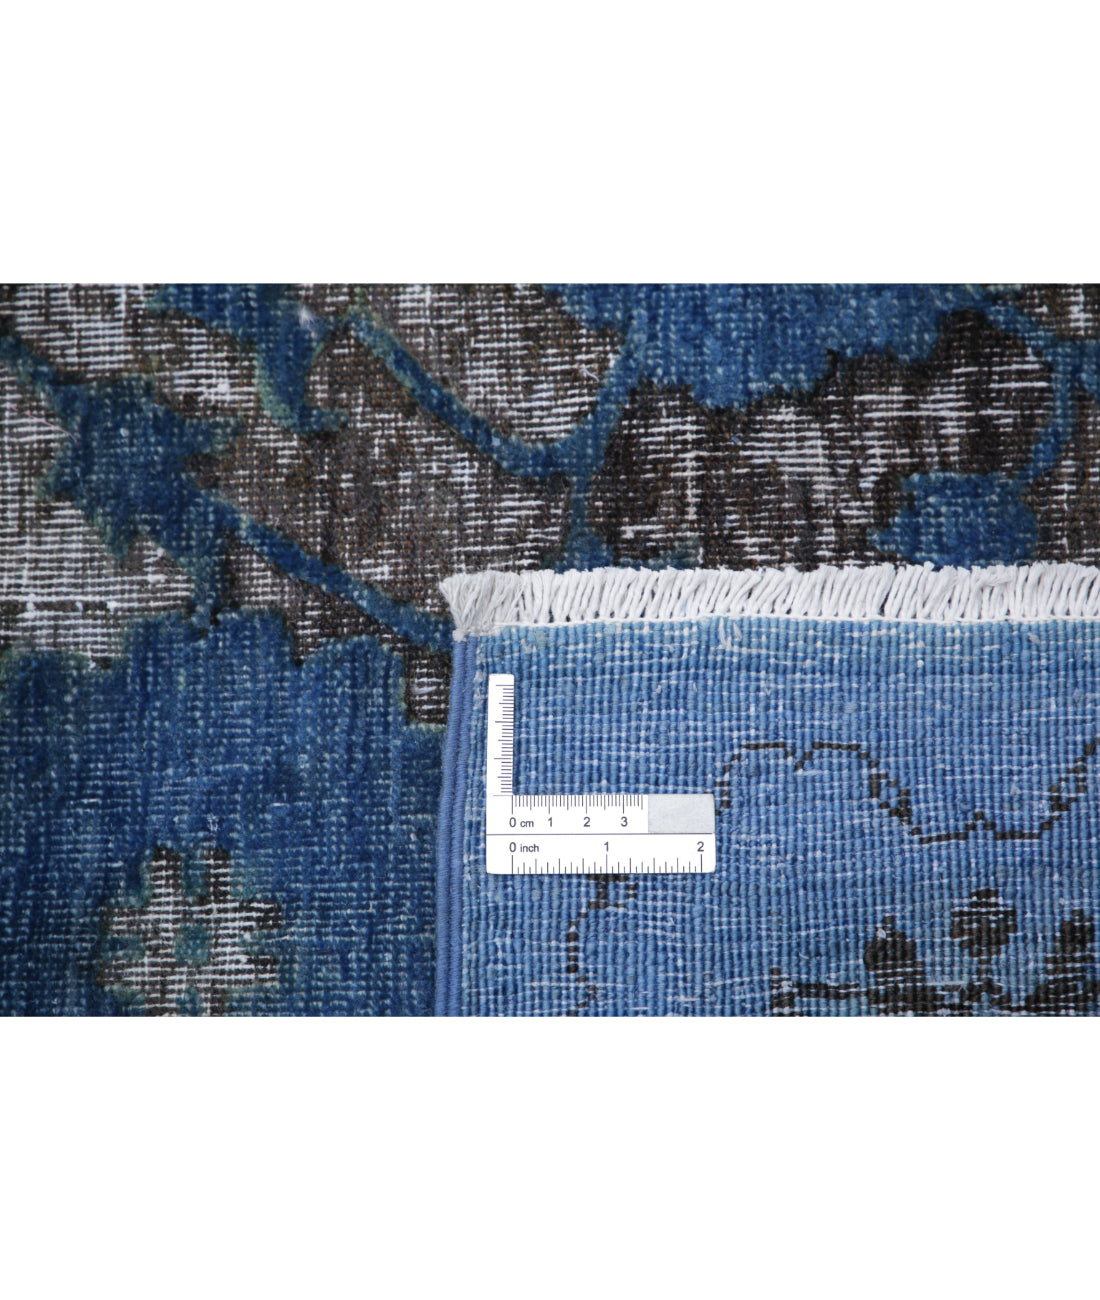 Hand Knotted Onyx Wool Rug - 6'2'' x 8'6'' 6'2'' x 8'6'' (185 X 255) / Blue / Blue